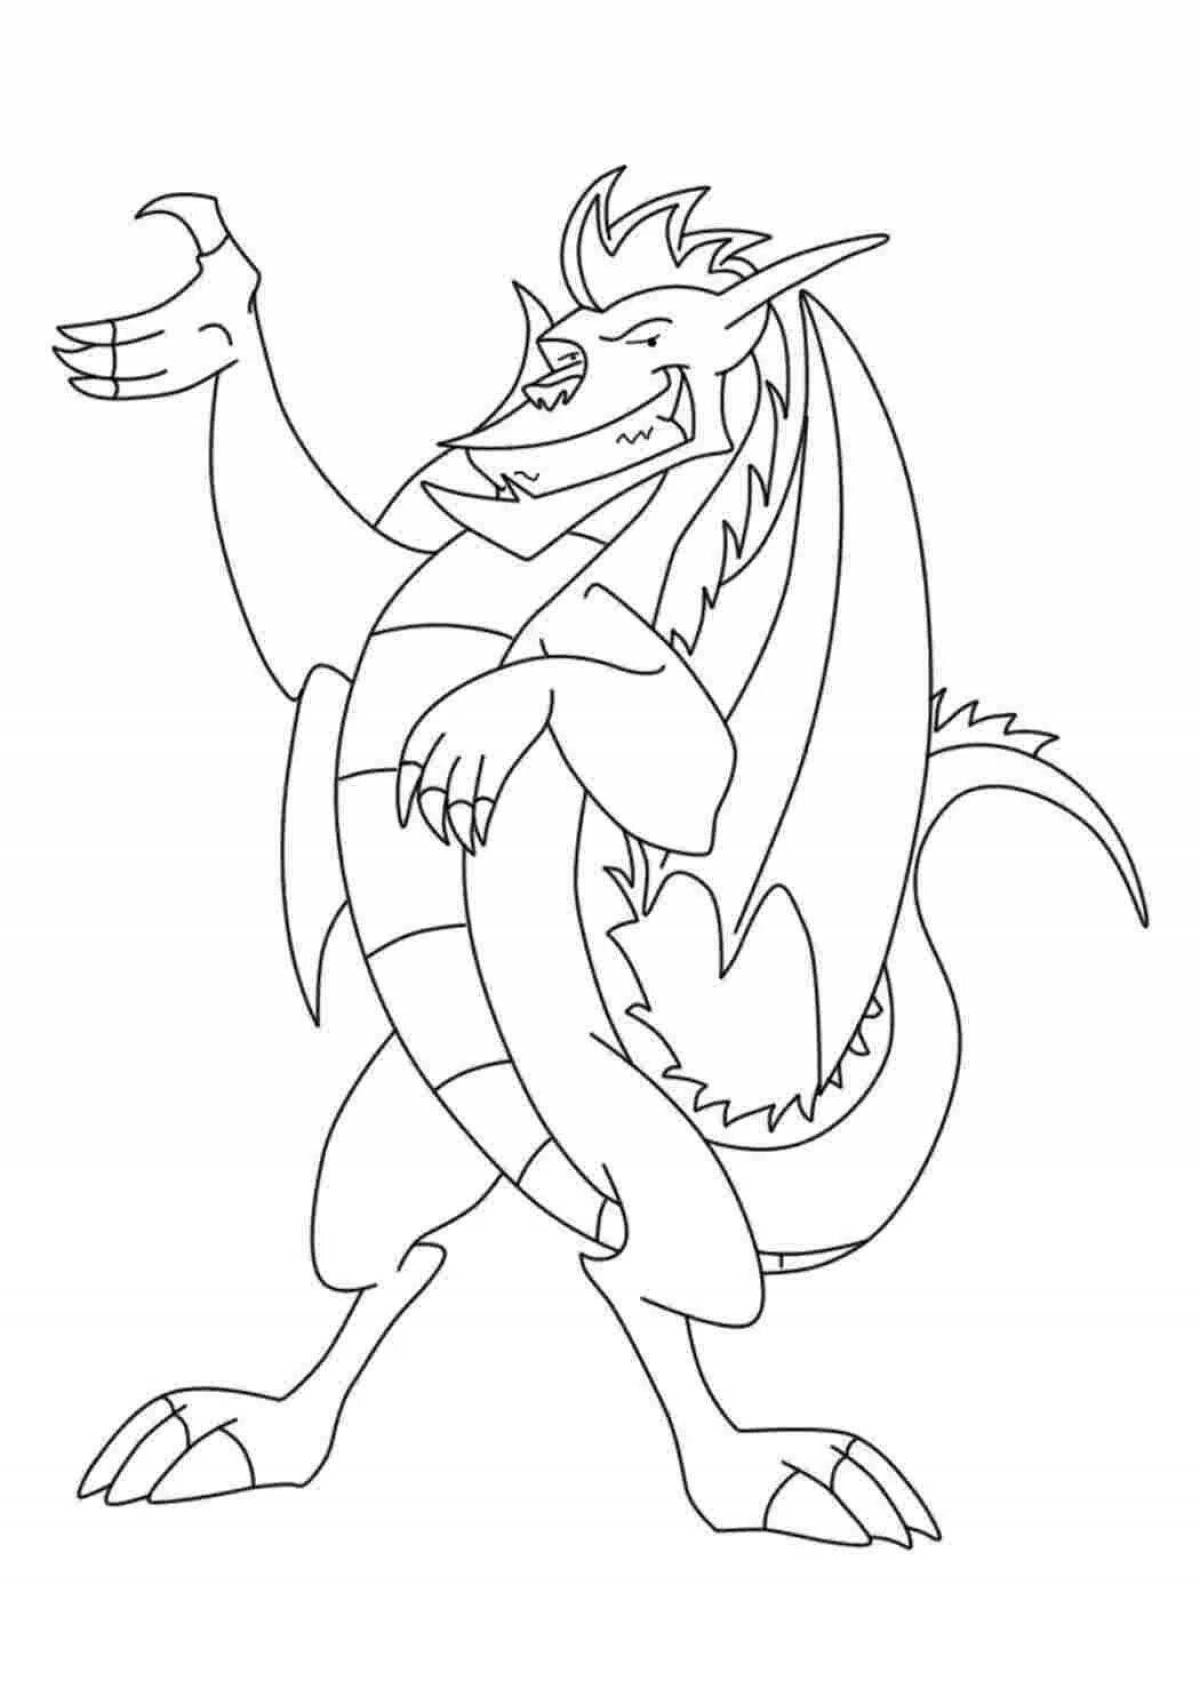 Colorfully detailed American dragon coloring page